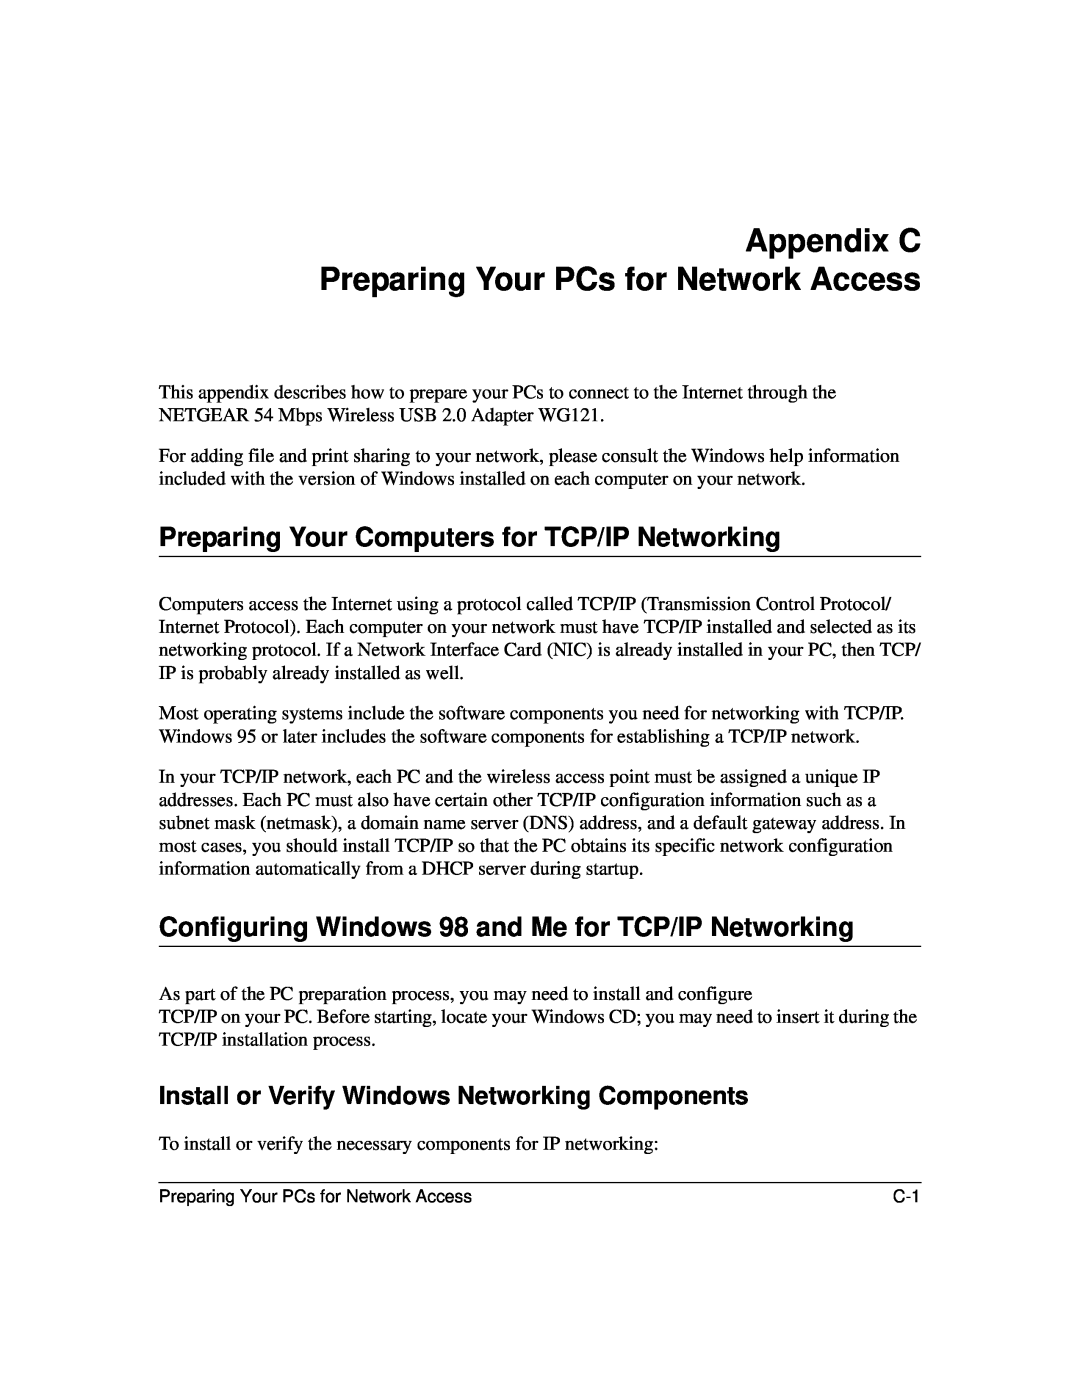 NETGEAR WG121 user manual Appendix C Preparing Your PCs for Network Access, Preparing Your Computers for TCP/IP Networking 